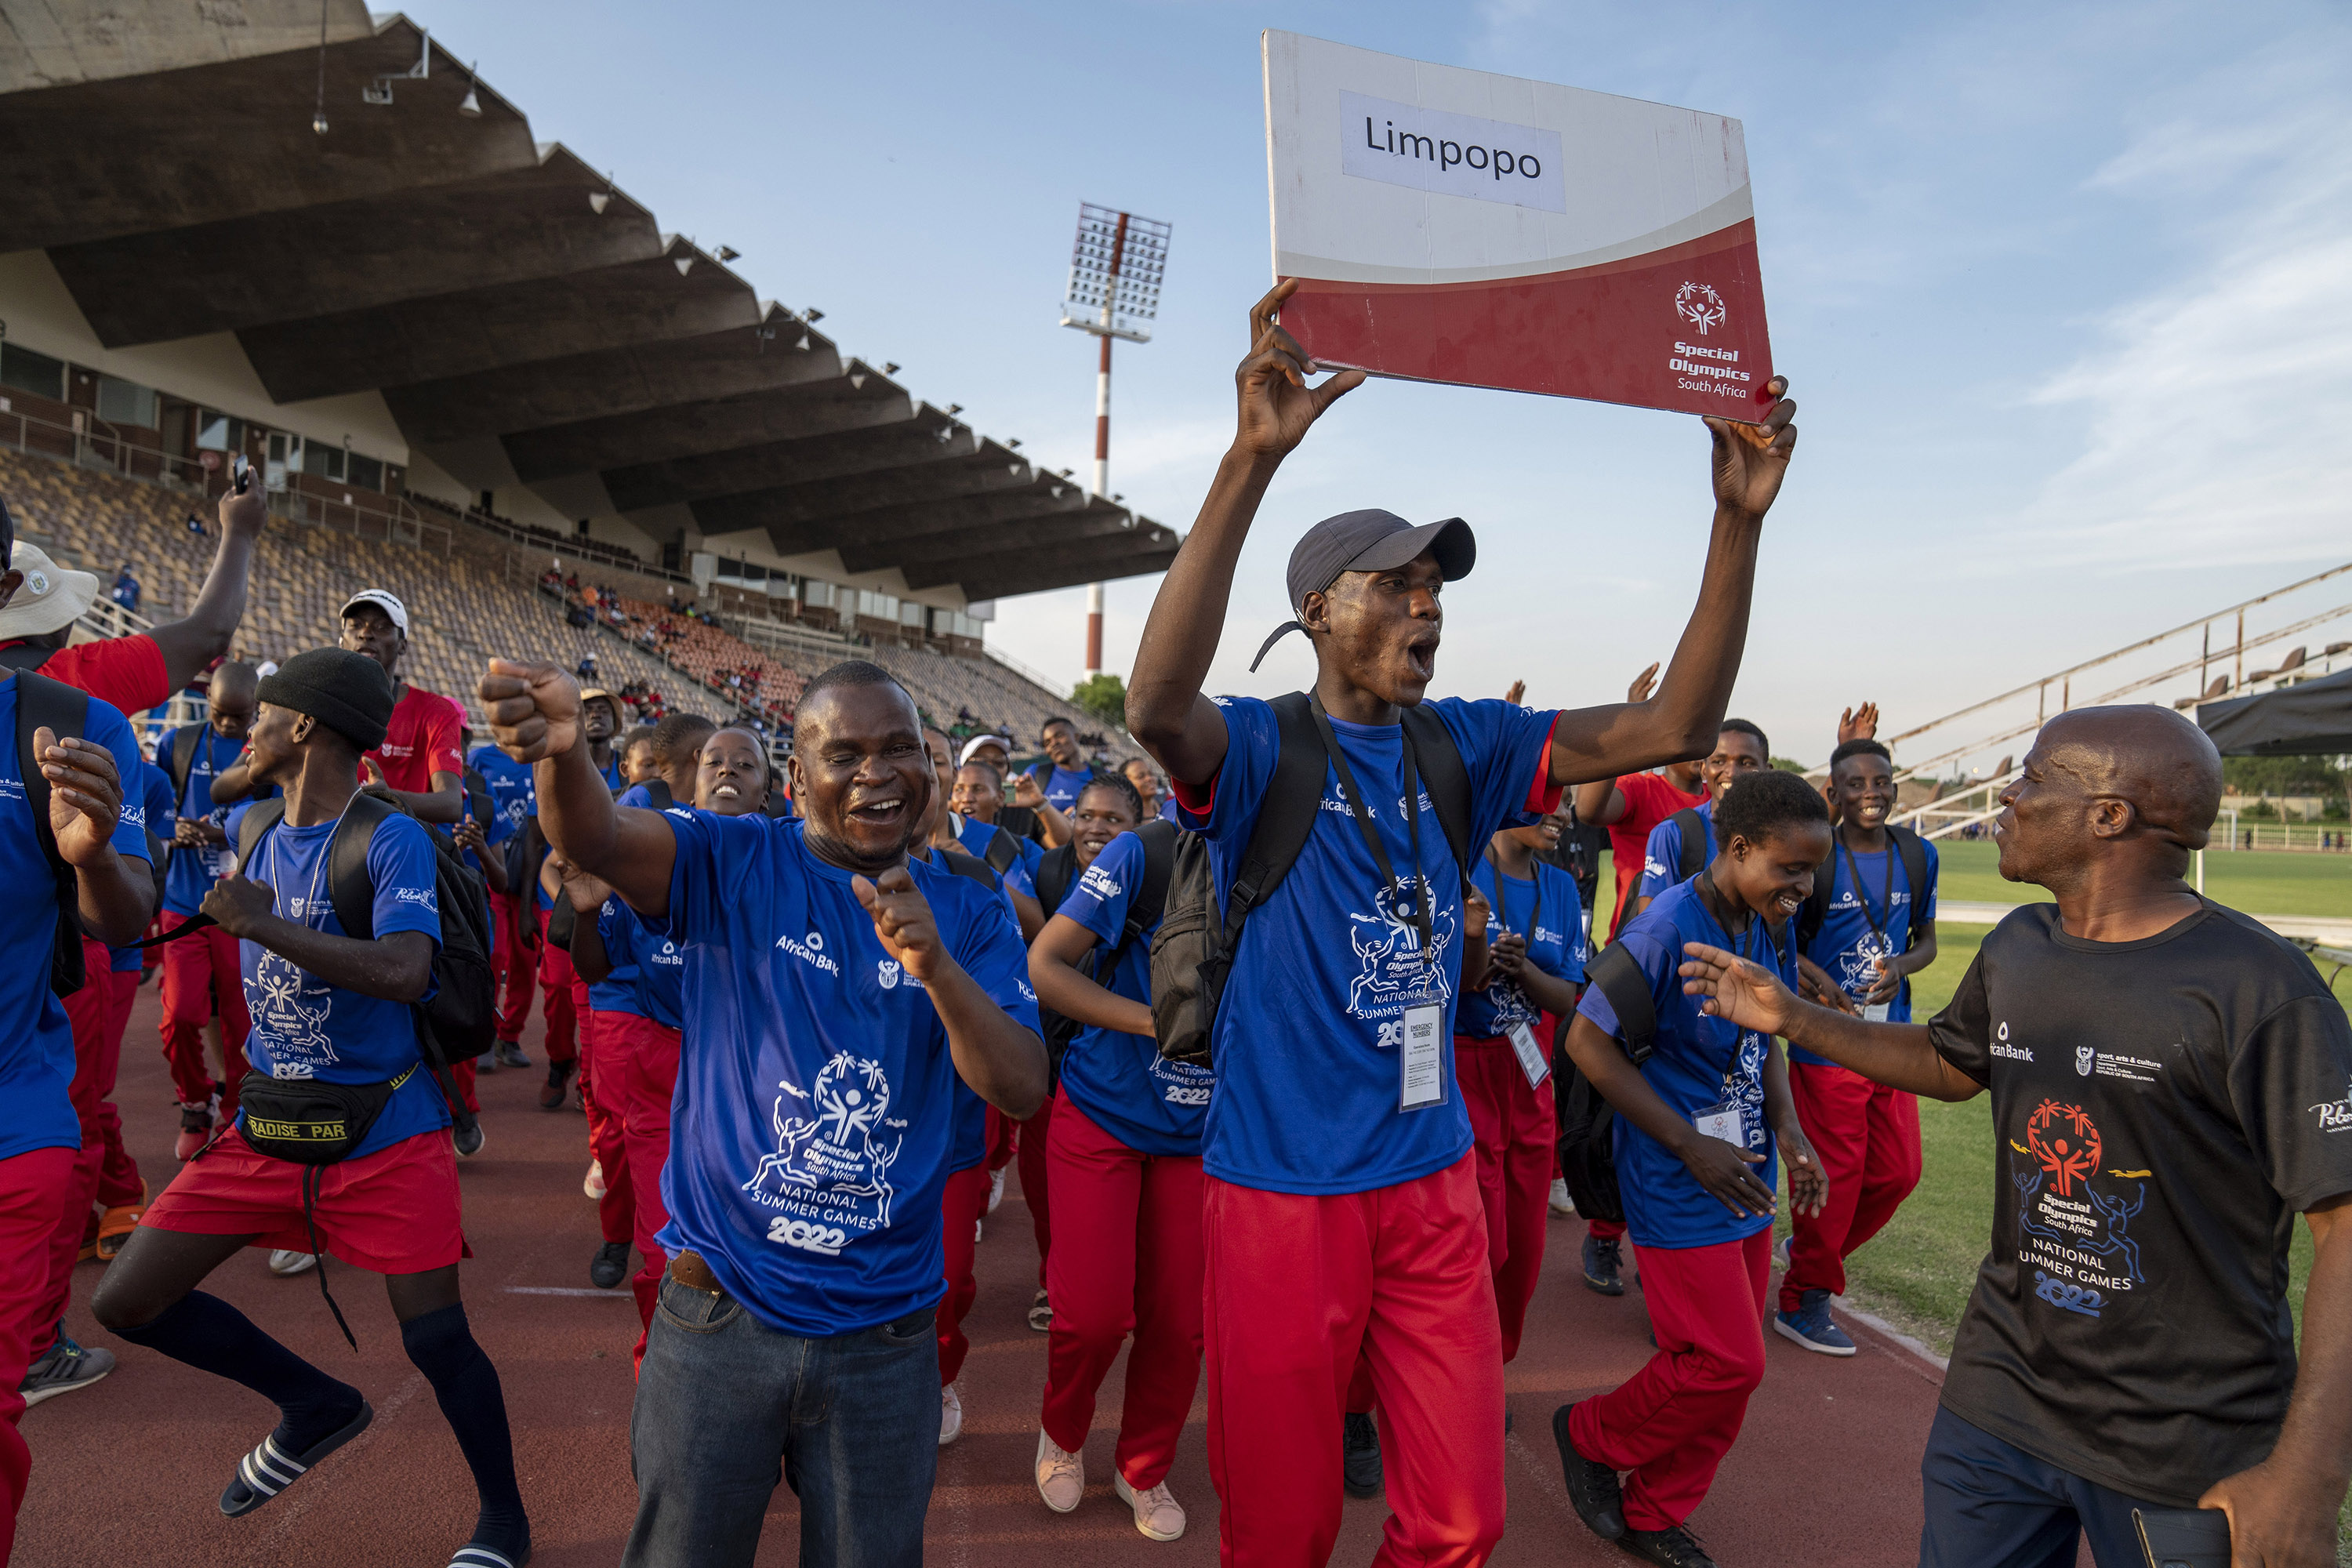 Opening ceremony of the national Special Olympics